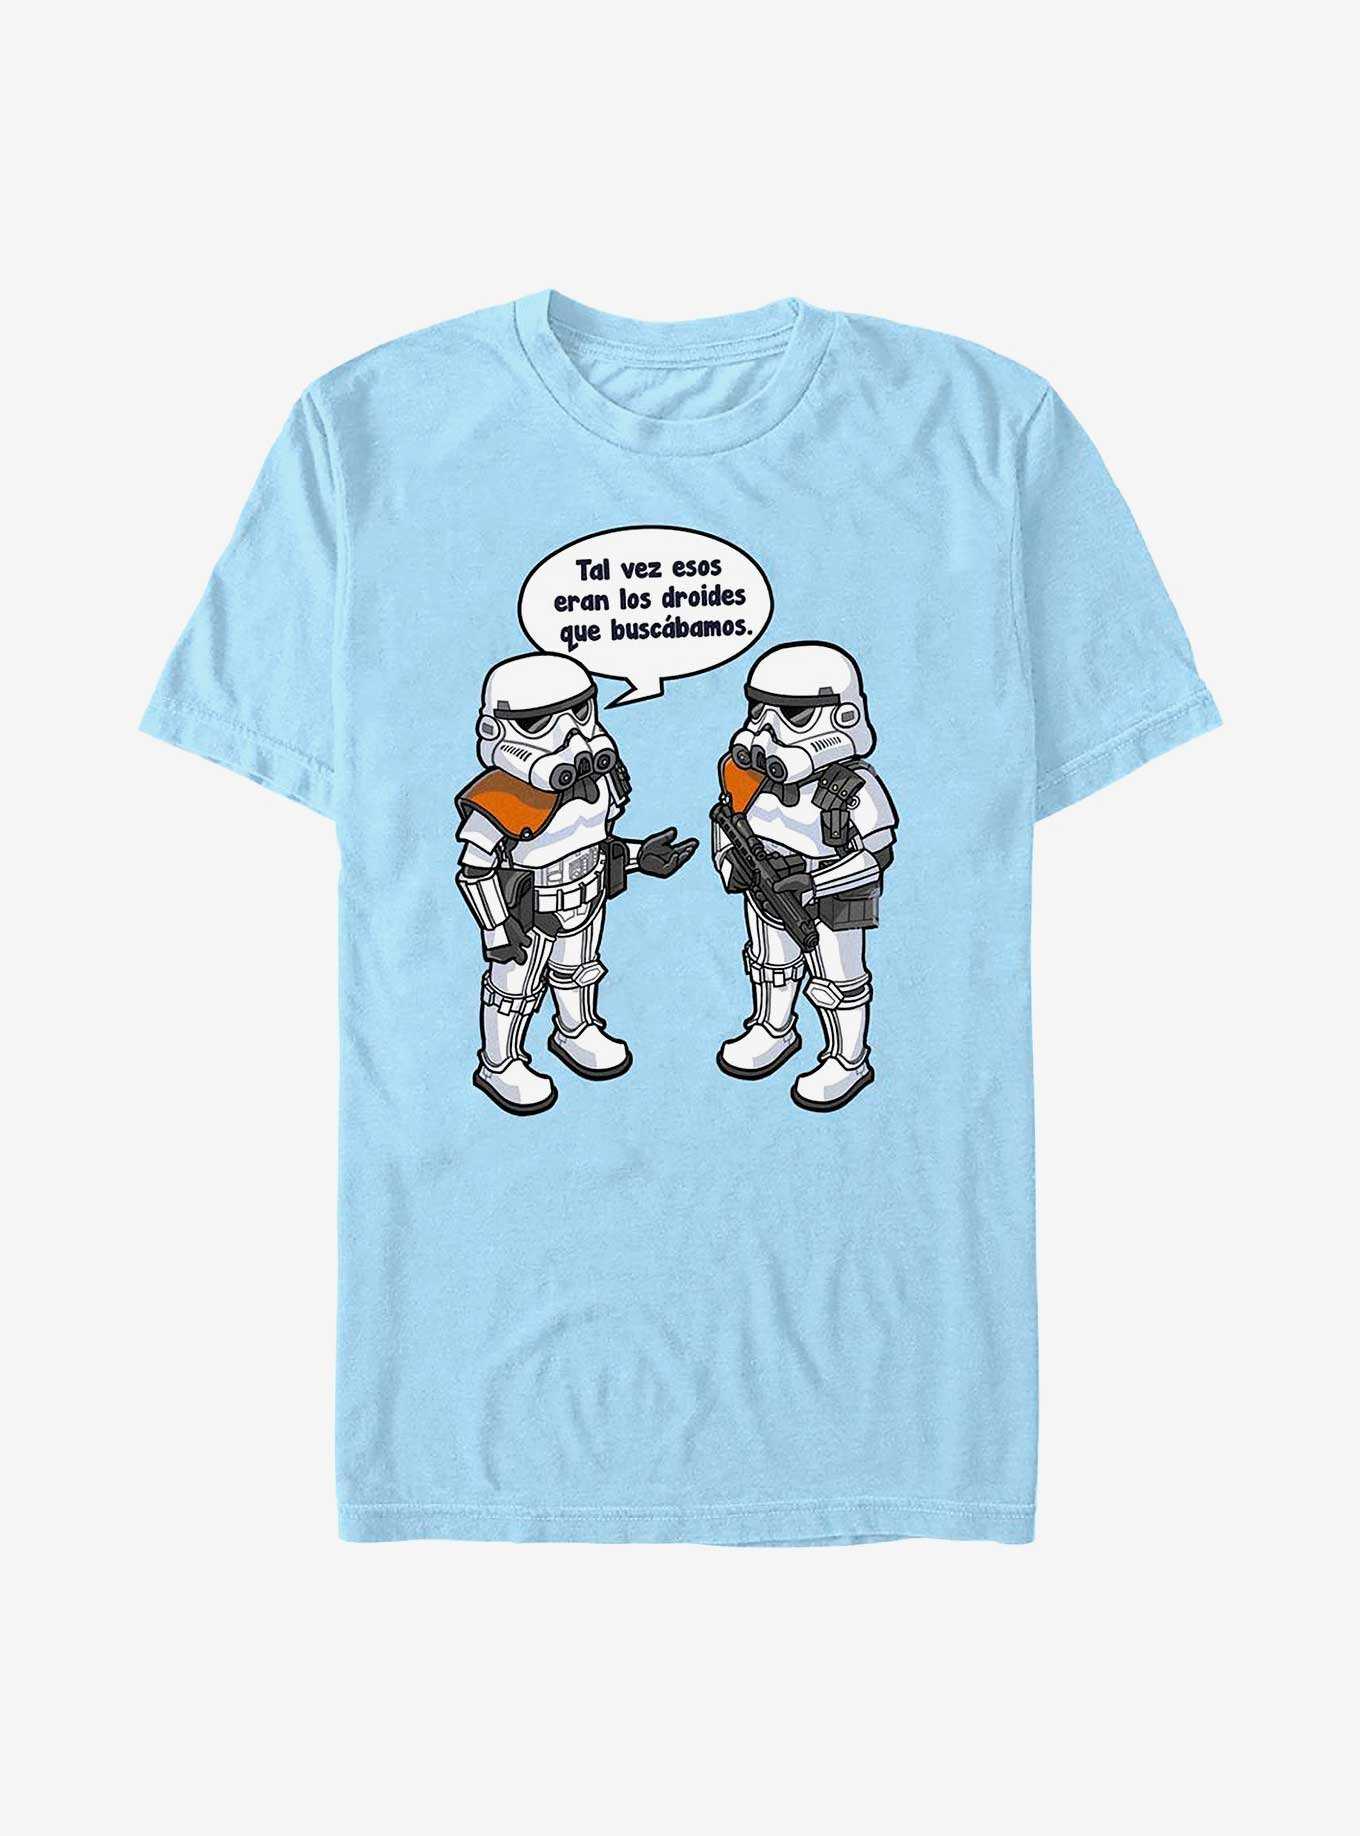 Star Wars Looking For Droids Spanish T-Shirt, , hi-res